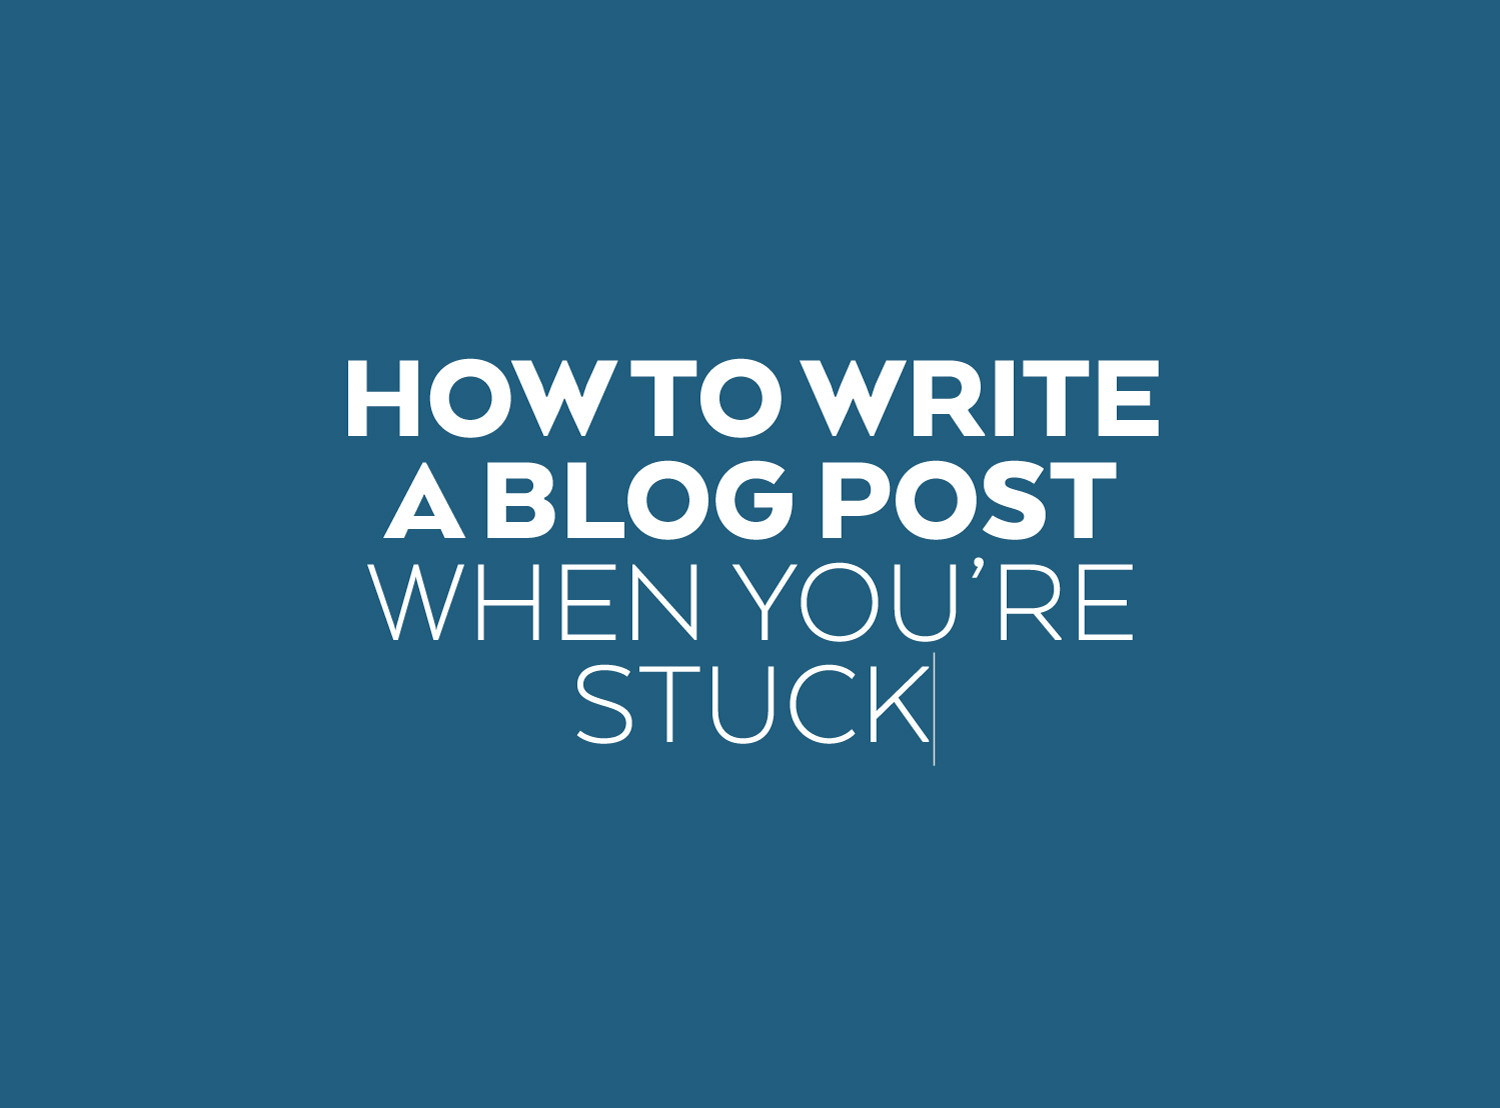 How to write a blog post when you're stuck